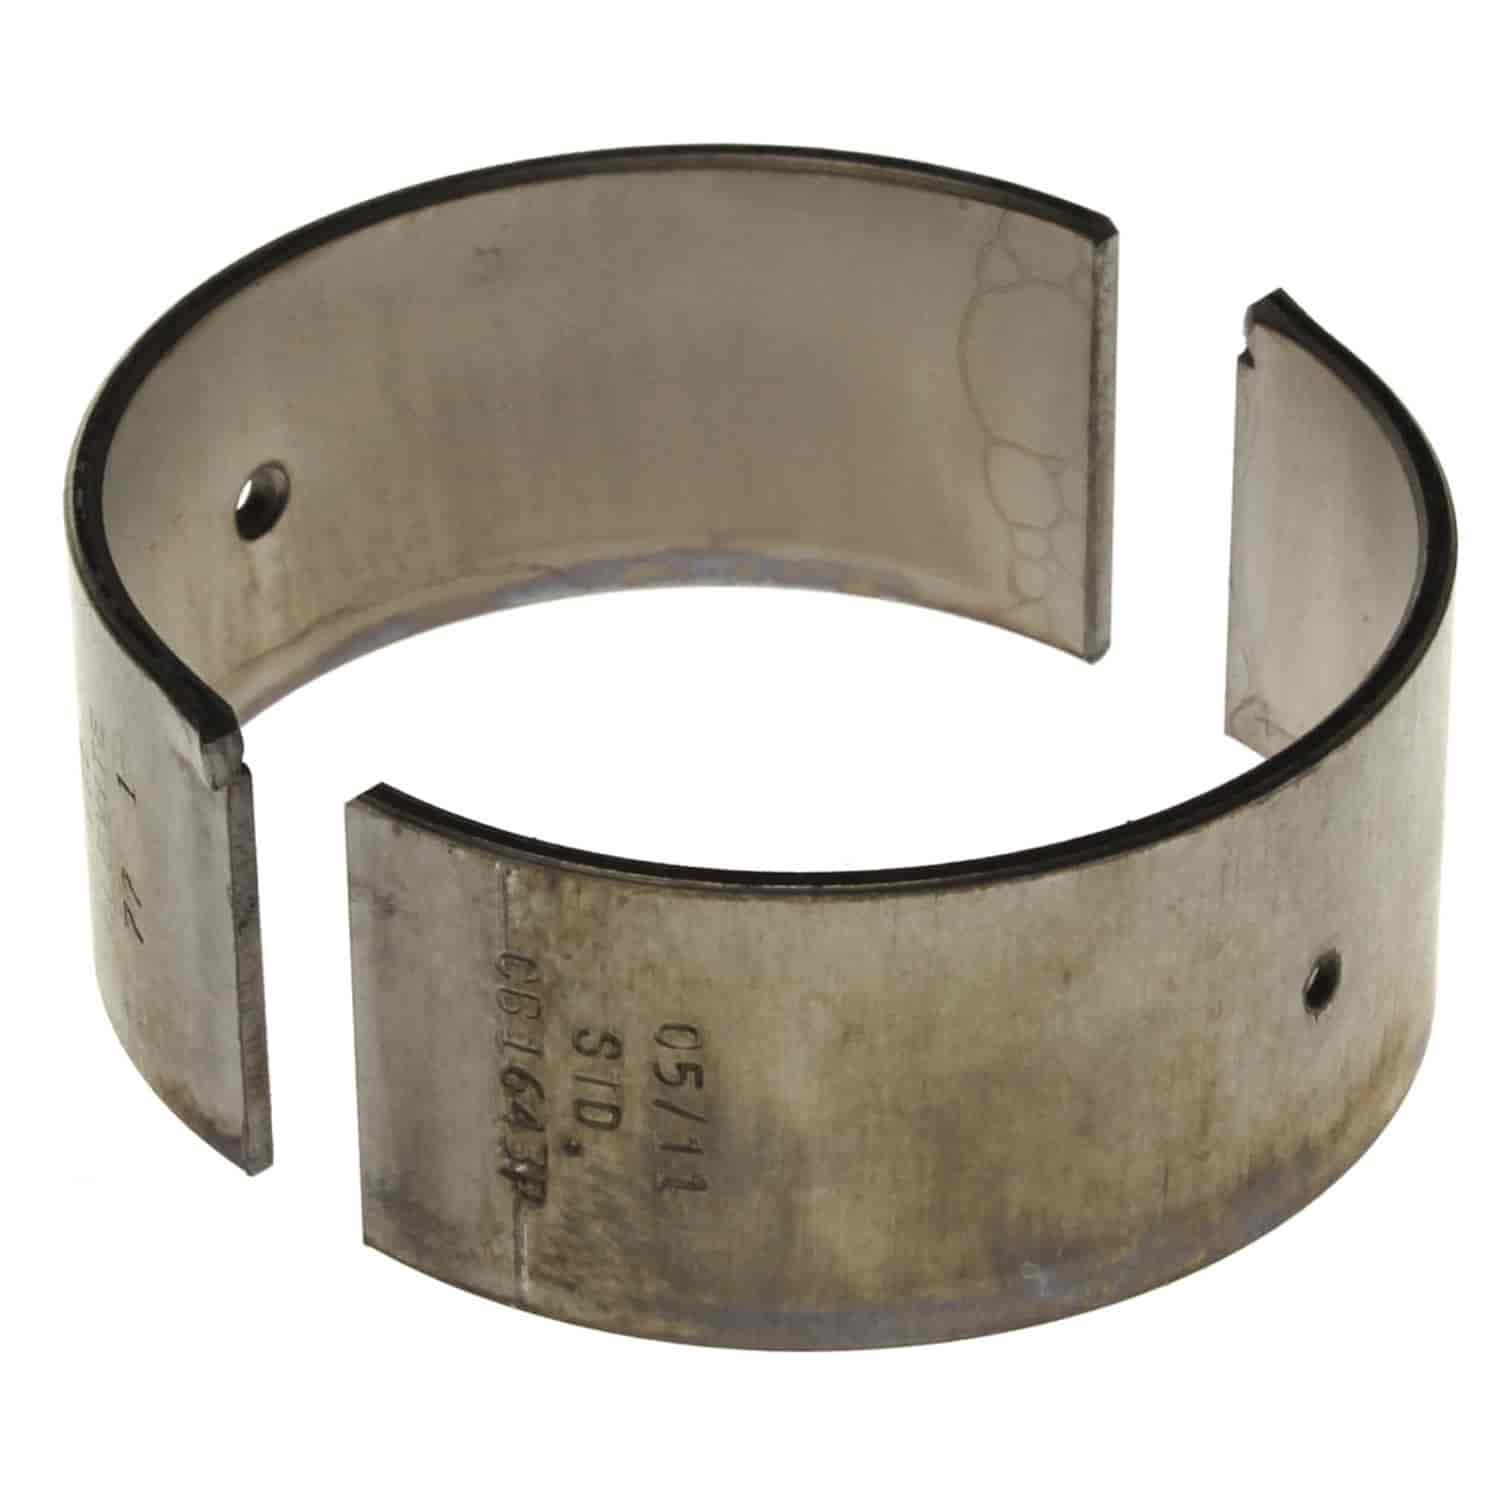 Connecting Rod Bearing Chrysler/Mistubishi  1971-1994 L4 1.6/1.8/2.0/2.4L with -.25mm Undersize